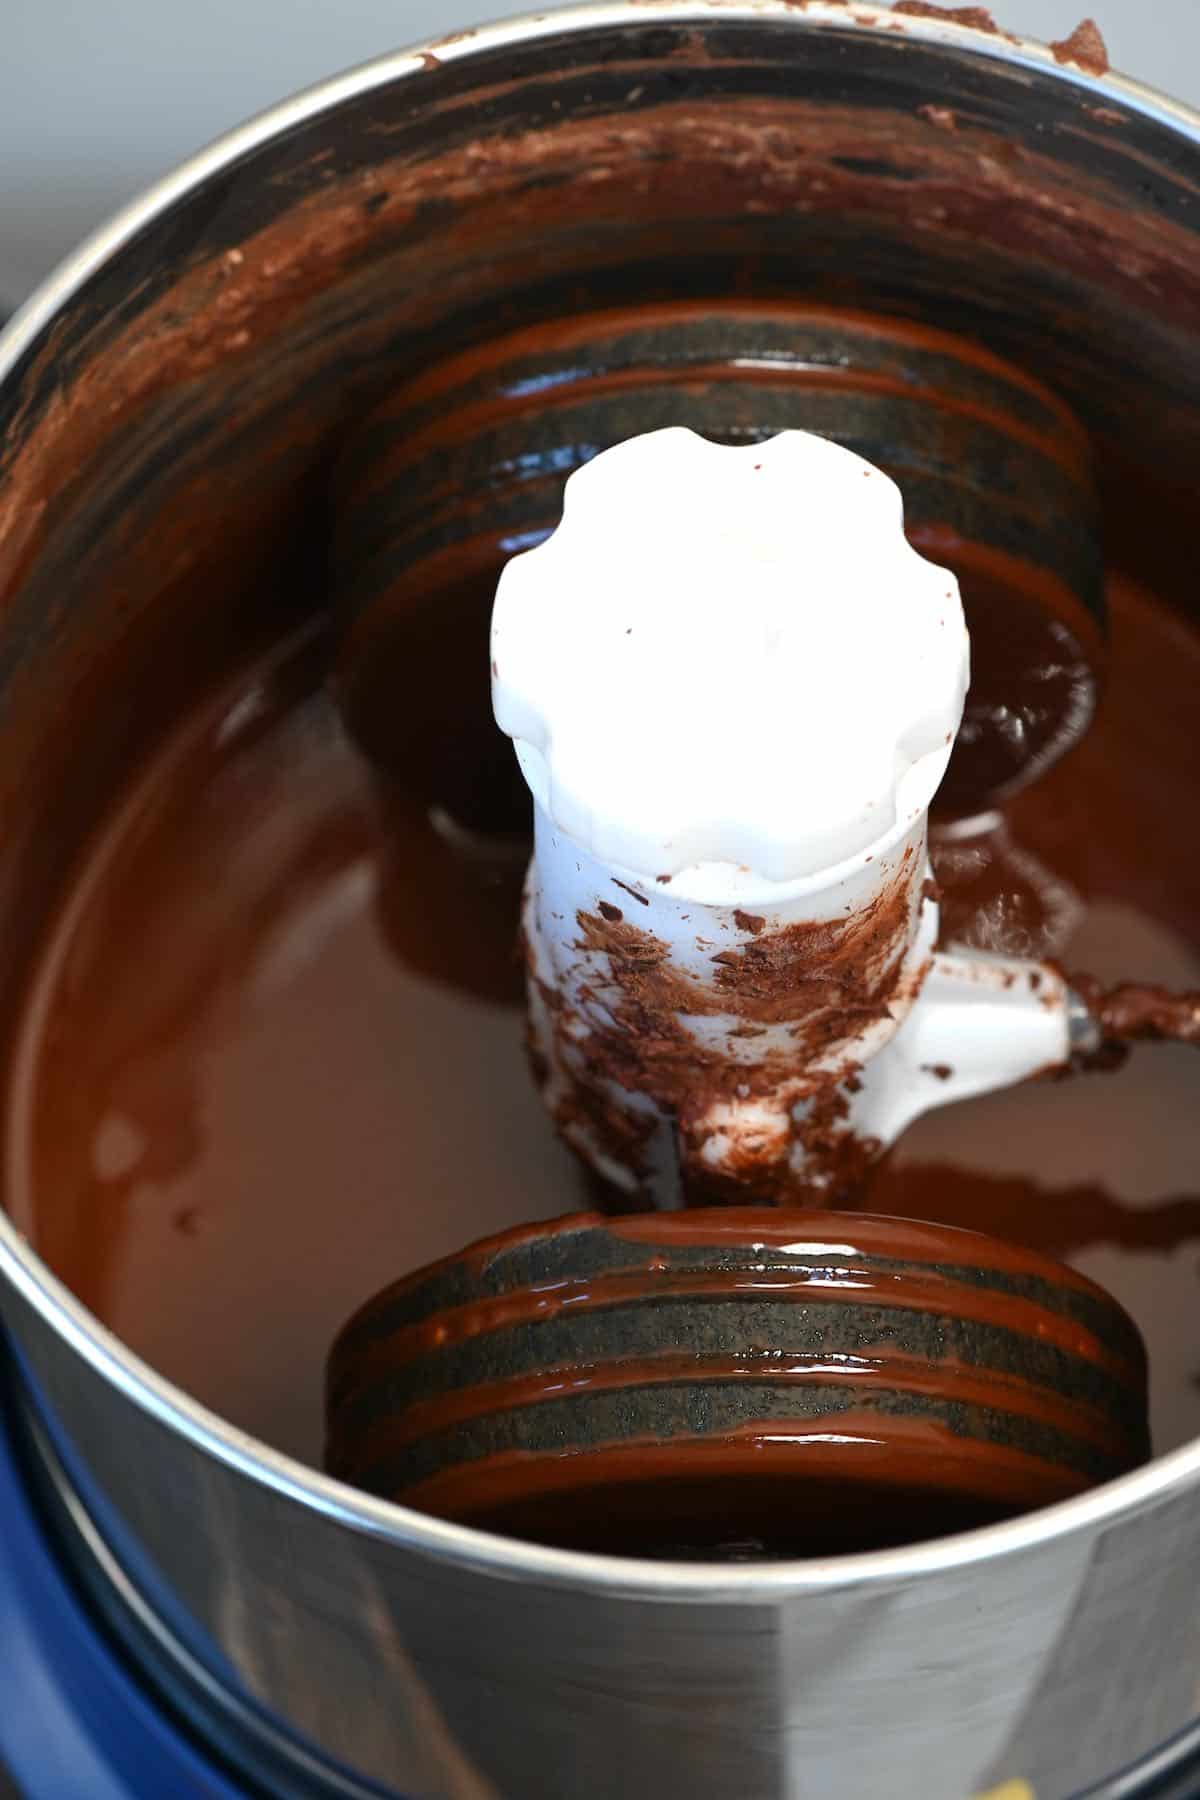 A wet grinder making a chocolate